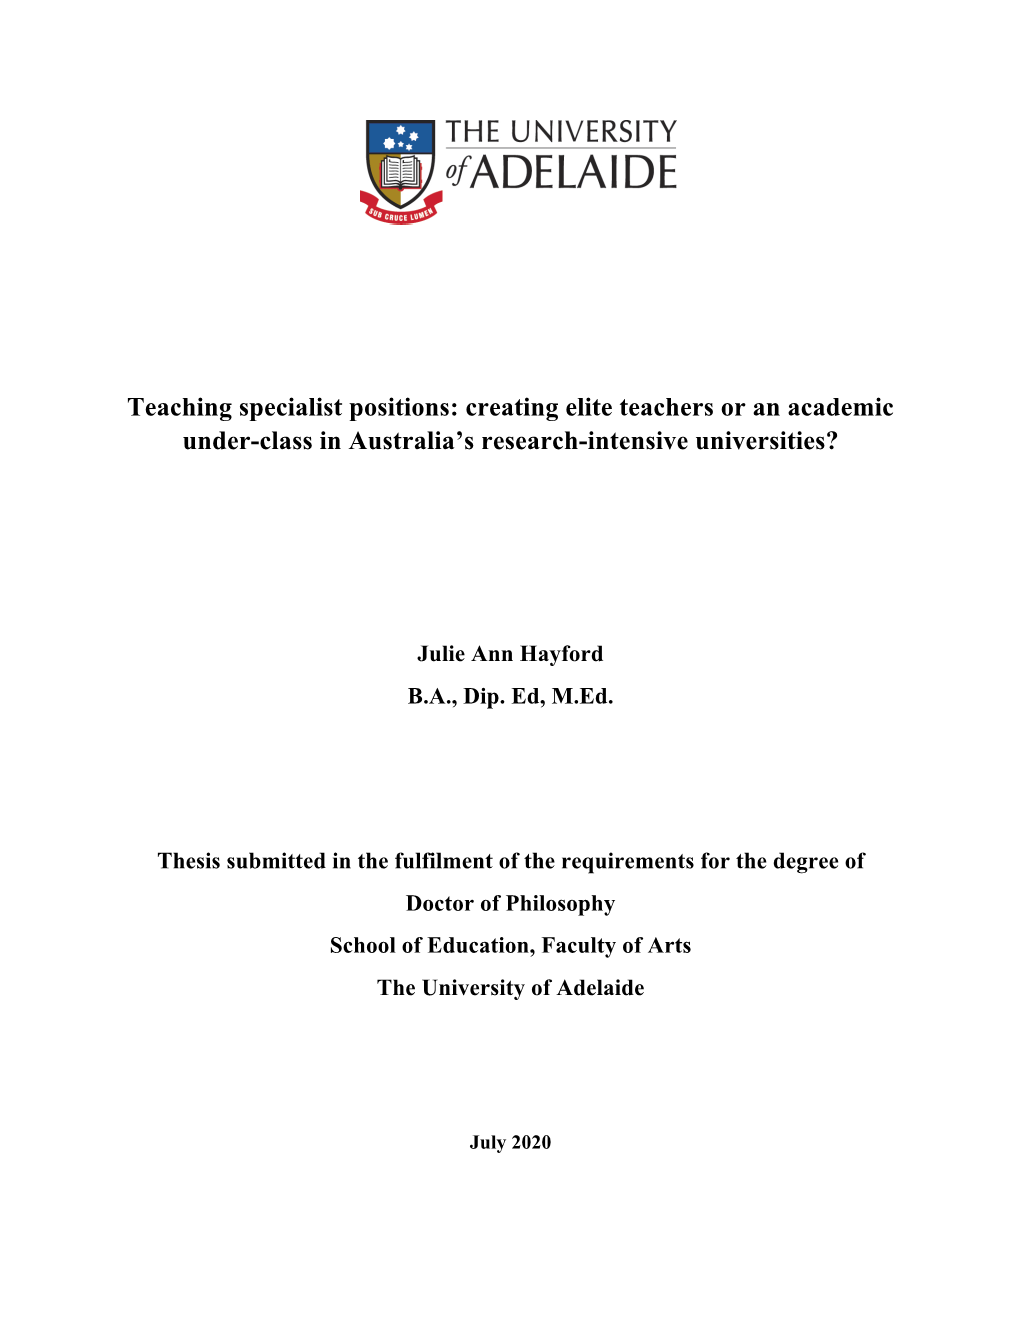 Teaching Specialist Positions: Creating Elite Teachers Or an Academic Under-Class in Australia’S Research-Intensive Universities?